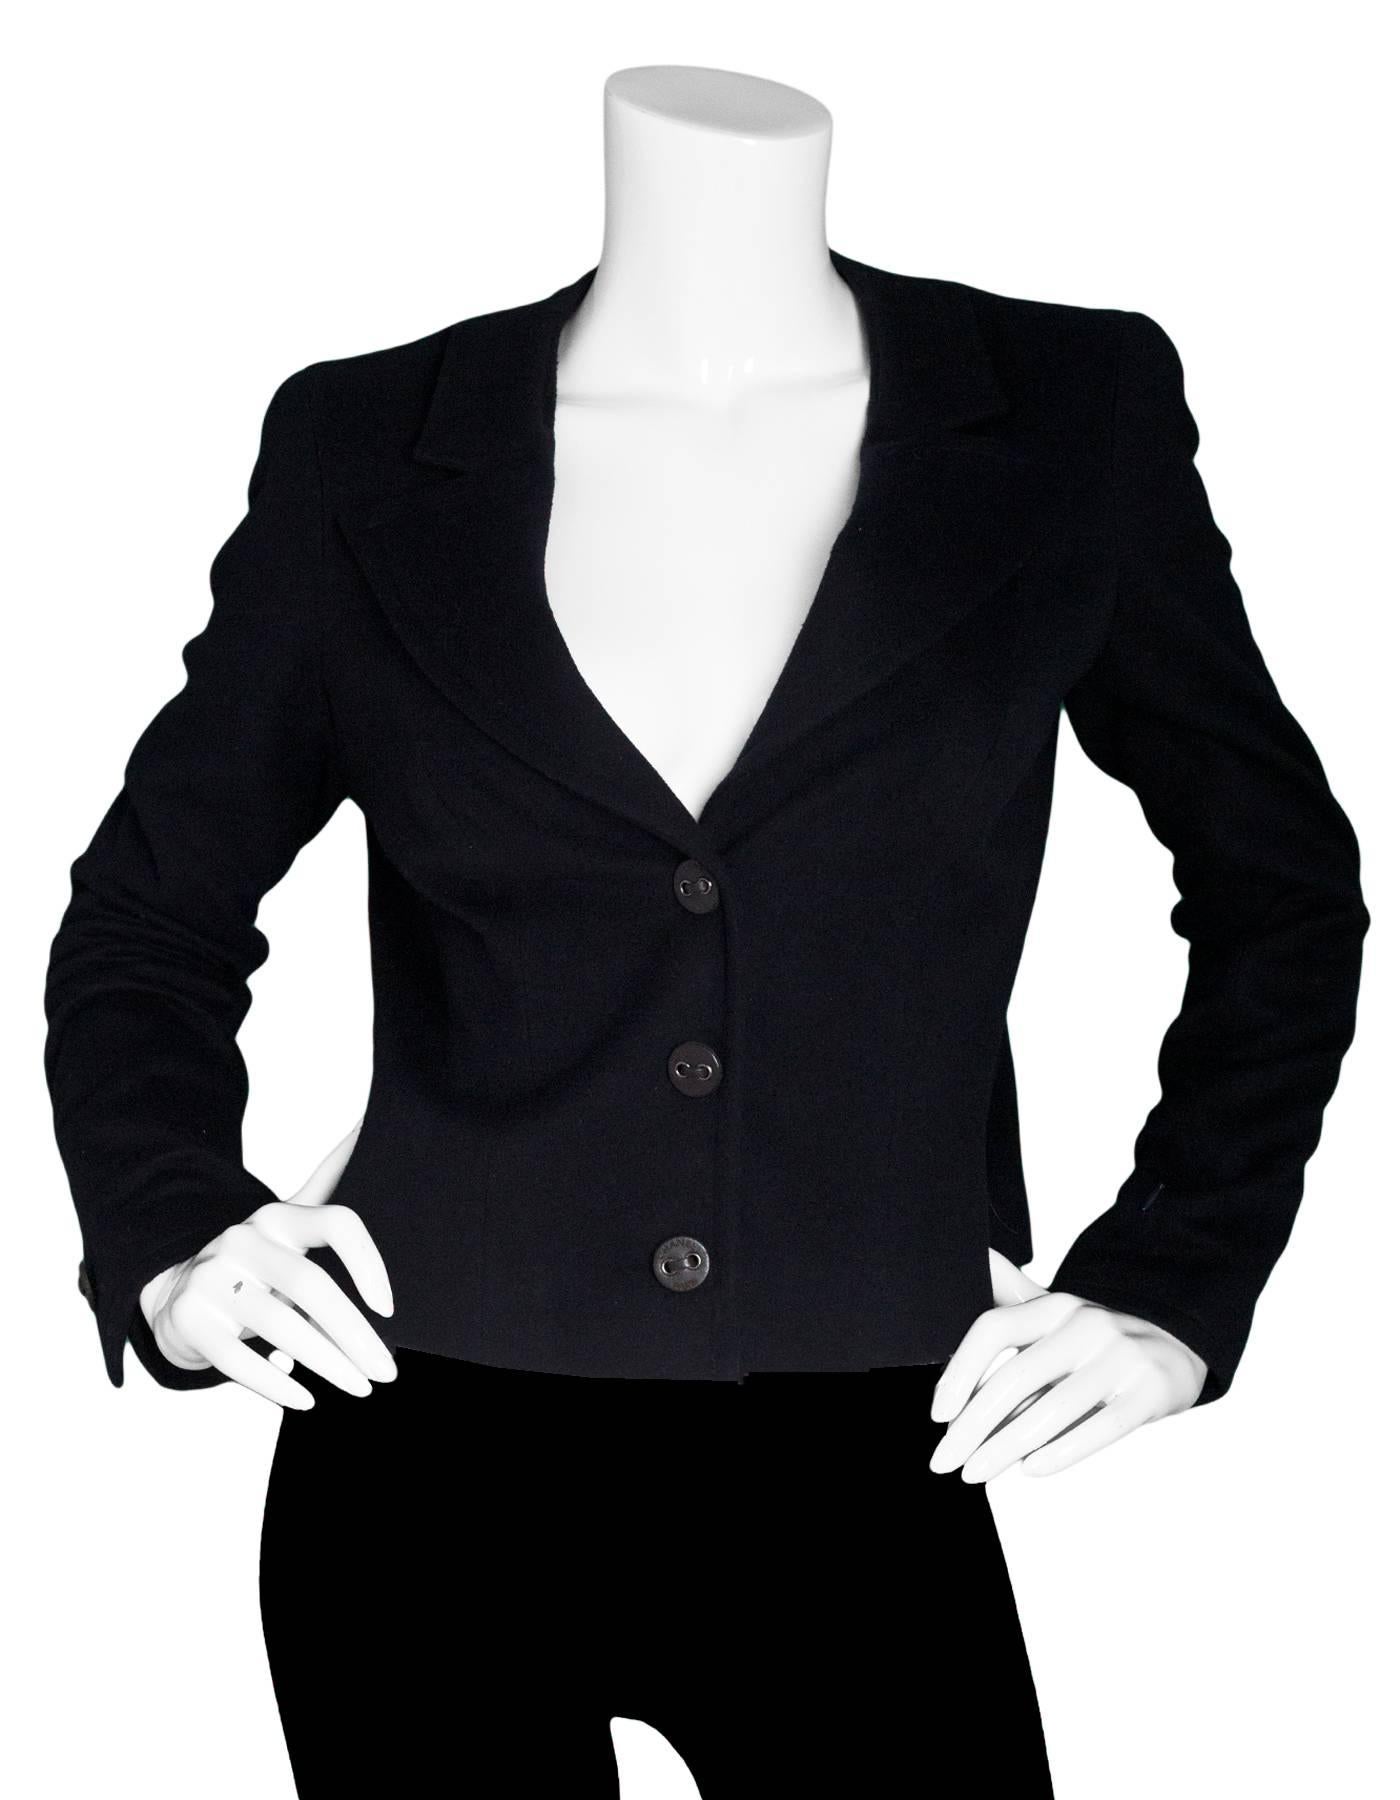 Chanel Black Cashmere Jacket Sz FR 42

Made In: France
Color: Black
Composition: 100% Cashmere
Lining: Black textile
Closure/Opening: Front snap button closure
Exterior Pockets: None
Interior Pockets: None
Overall Condition: Excellent pre-owned